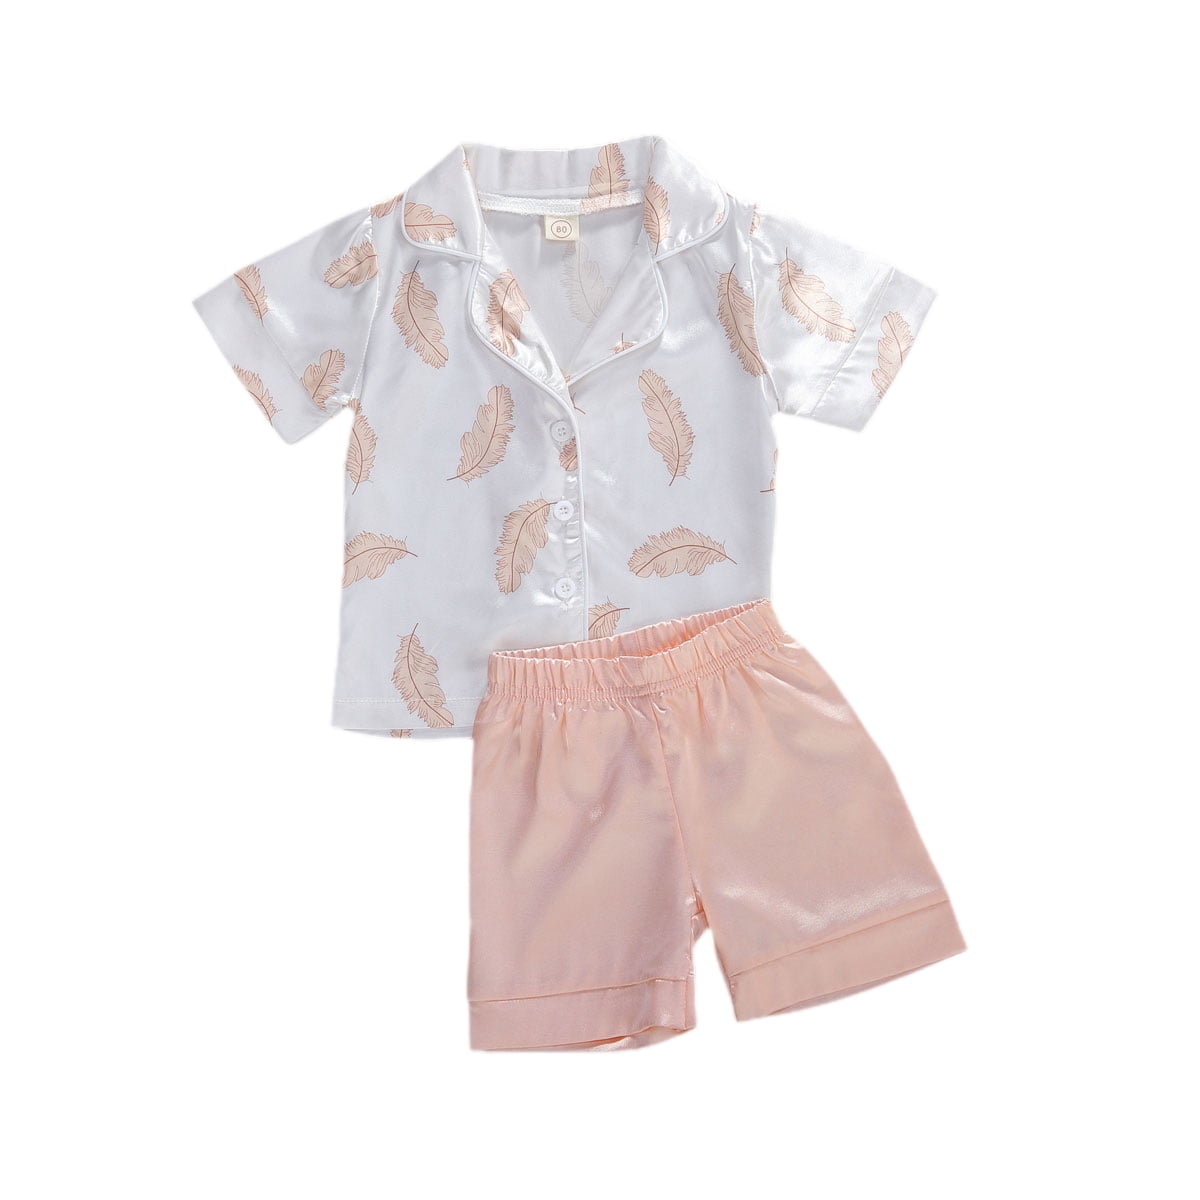 Buy > lounge shorts and top set > in stock